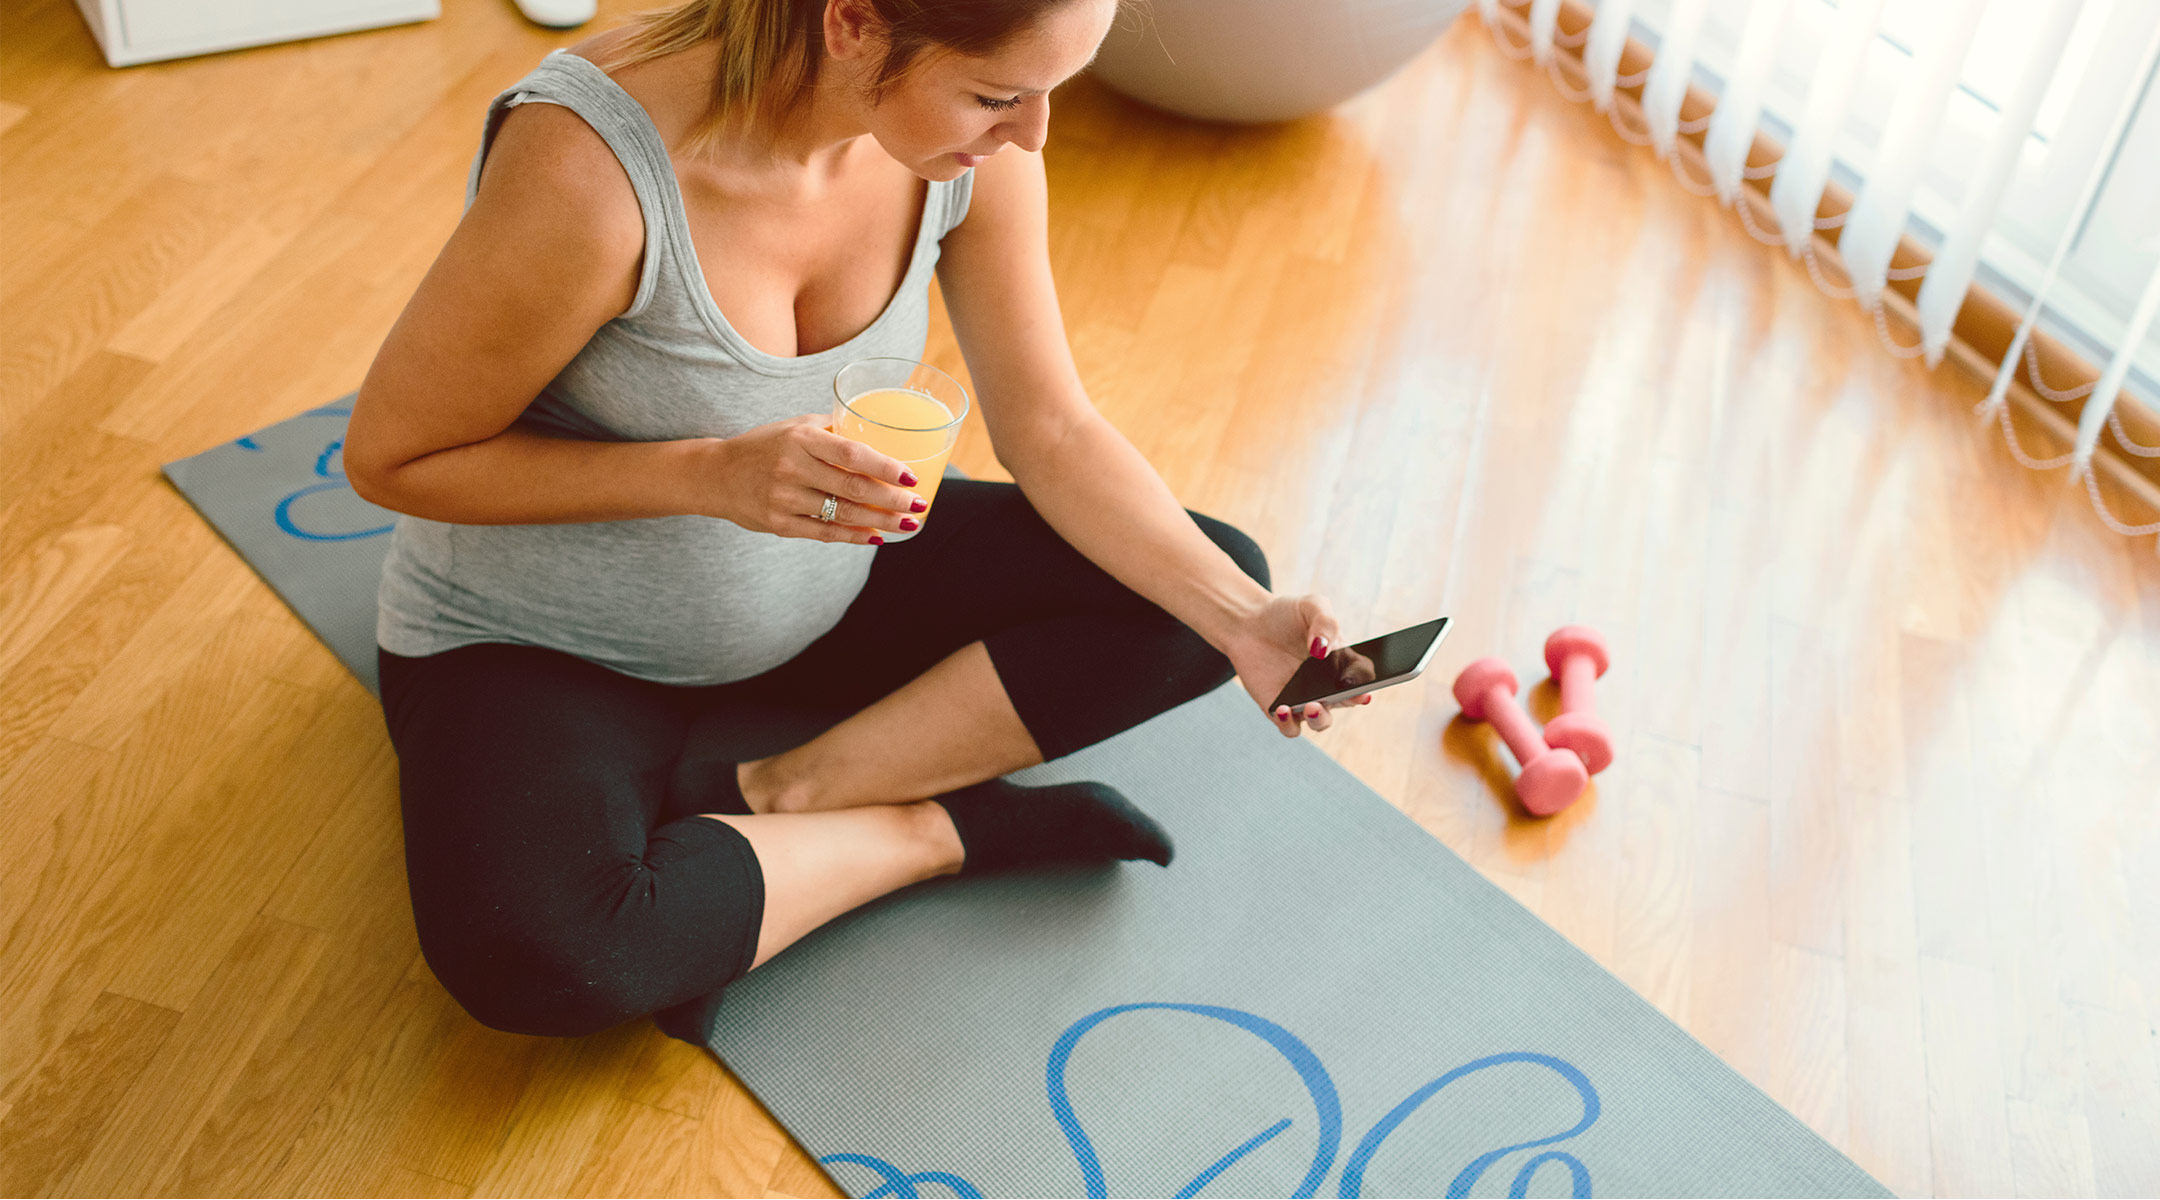 pregnant woman urges tech companies to have better pregnancy fitness apps